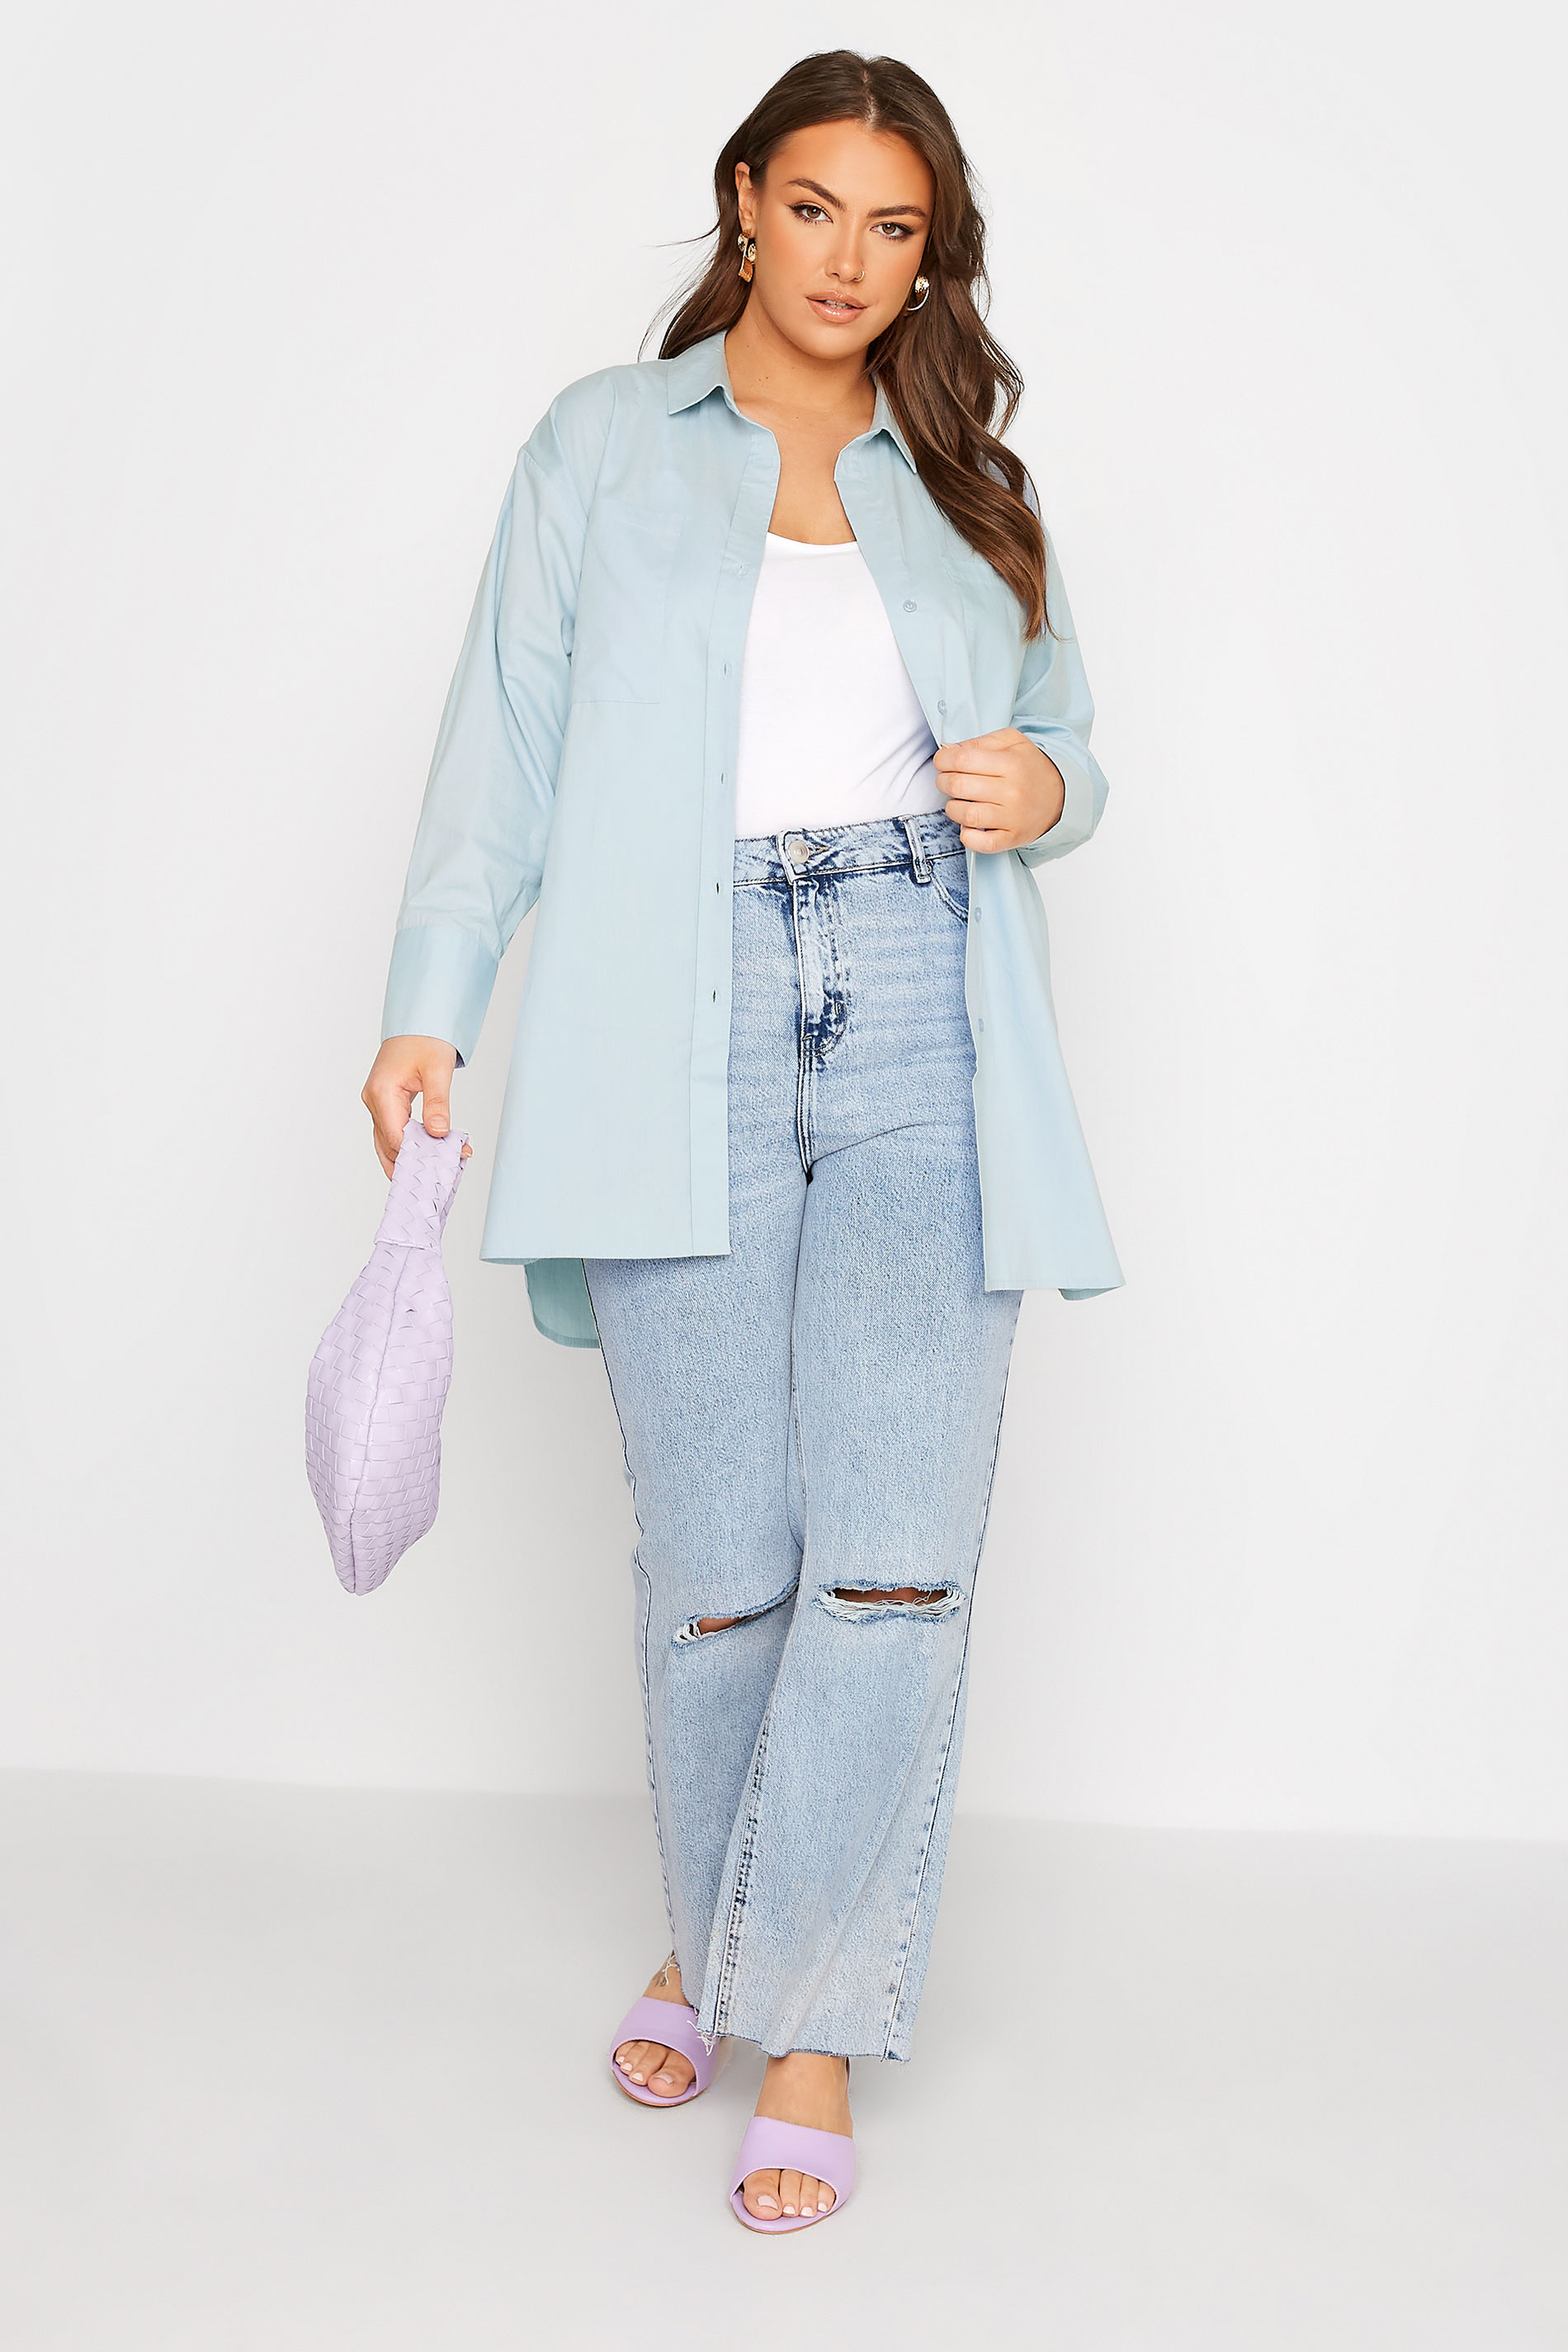 LIMITED COLLECTION Plus Size Light Blue Oversized Boyfriend Shirt | Yours Clothing 2